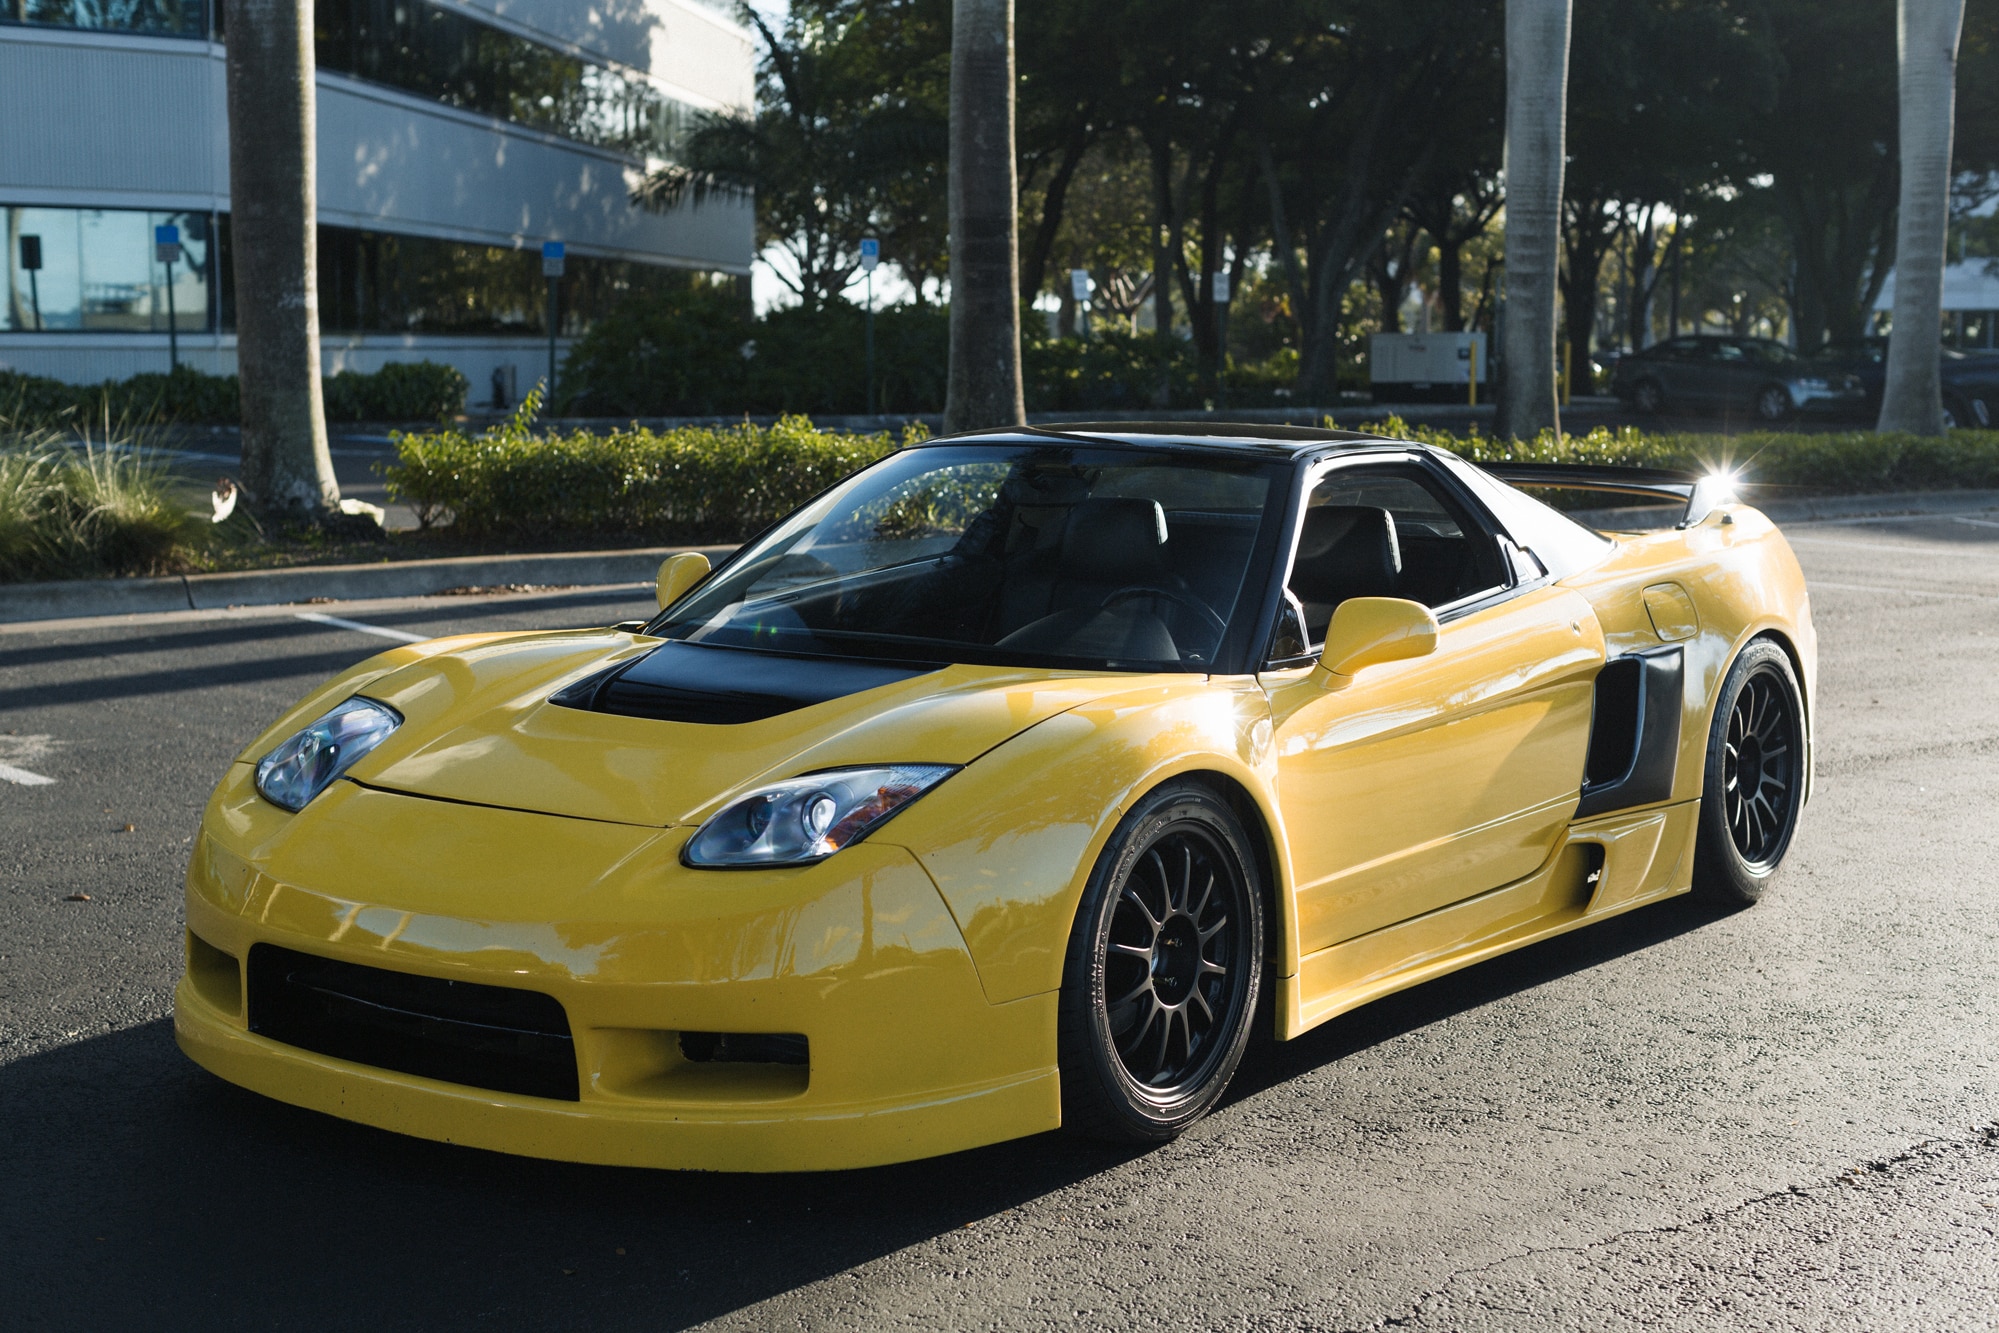 1991 Acura NSX (NA1) | 1 of 1 Factor X Motorsports Widebody | NSX-R Short Gear Set | Tein Coilovers | SSR Type Fs | NA2 Update | Service Records| NSX Prime Ownership History